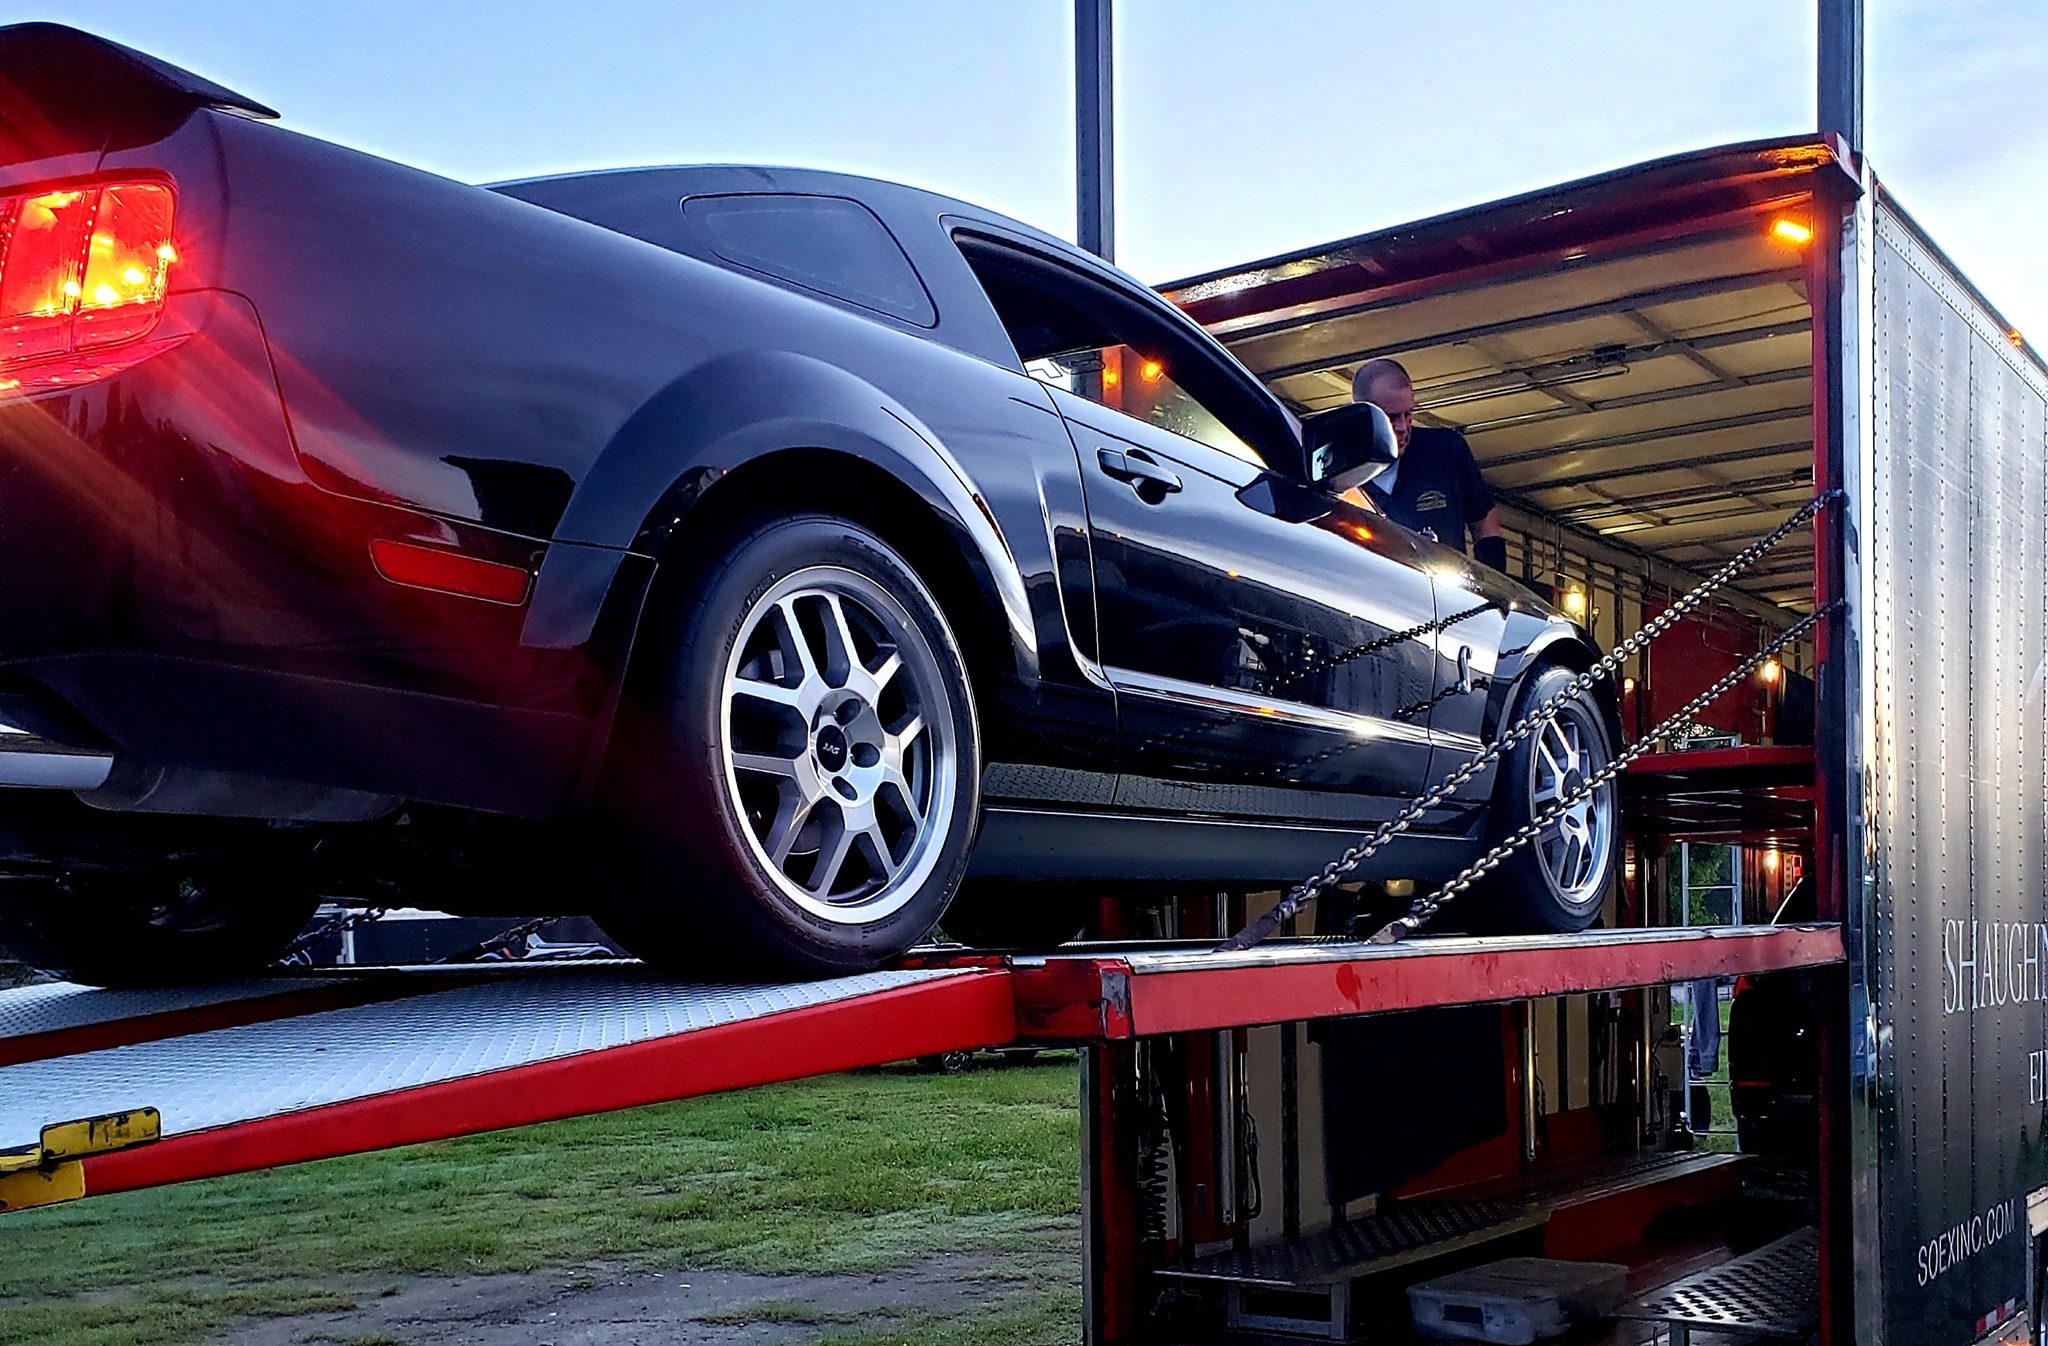 The Top 5 Reasons to Use Enclosed Auto Transport for Luxury Cars